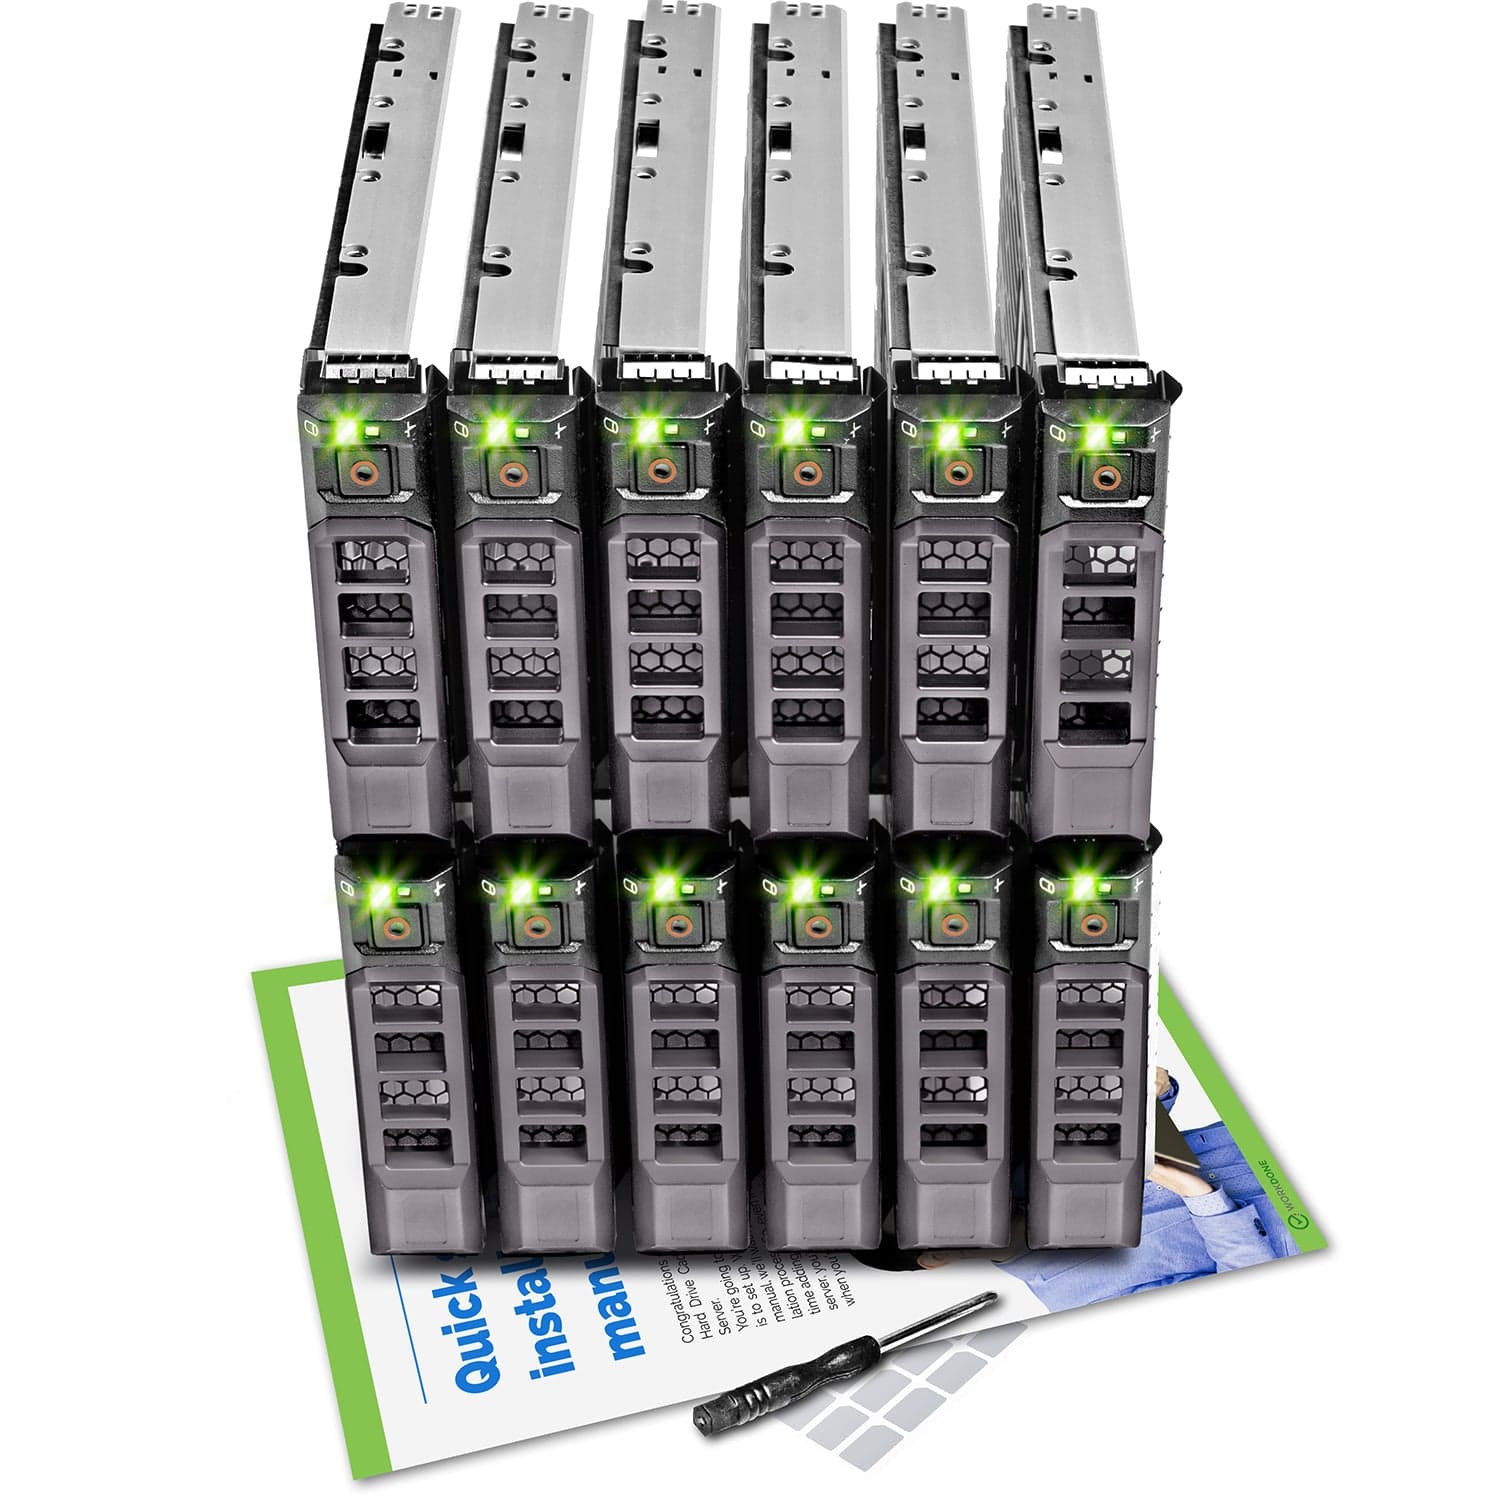 WORKDONE 12-Pack - 3.5" Hard Drive Caddy 0F238F - Compatible para Dell PowerEdge  Selected 11-13th Gen Servers